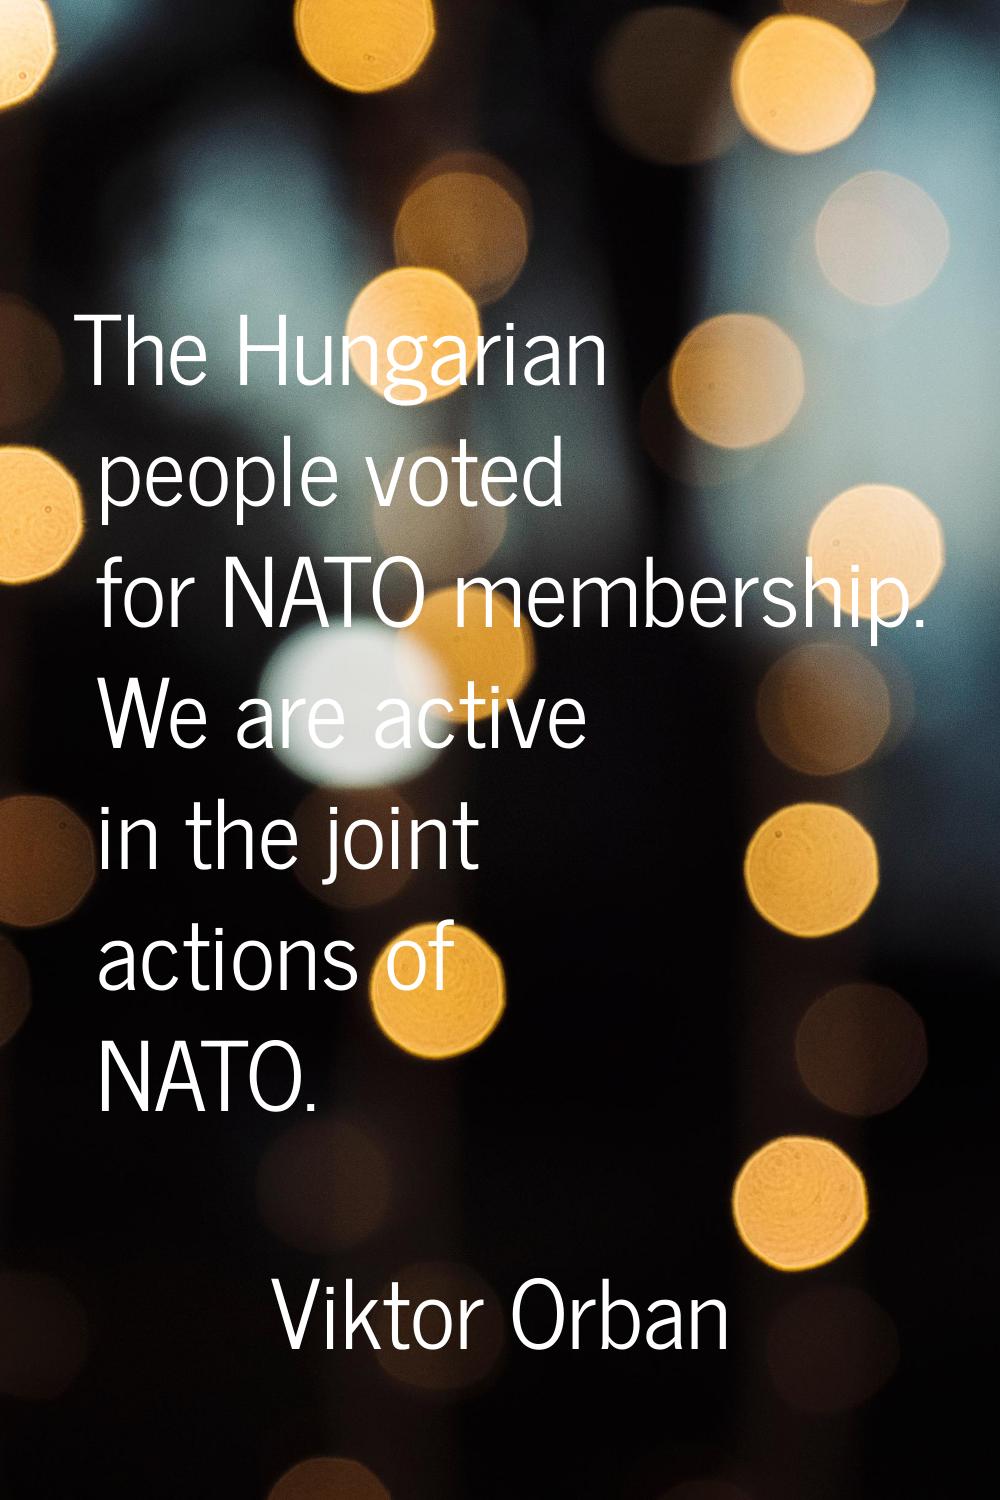 The Hungarian people voted for NATO membership. We are active in the joint actions of NATO.